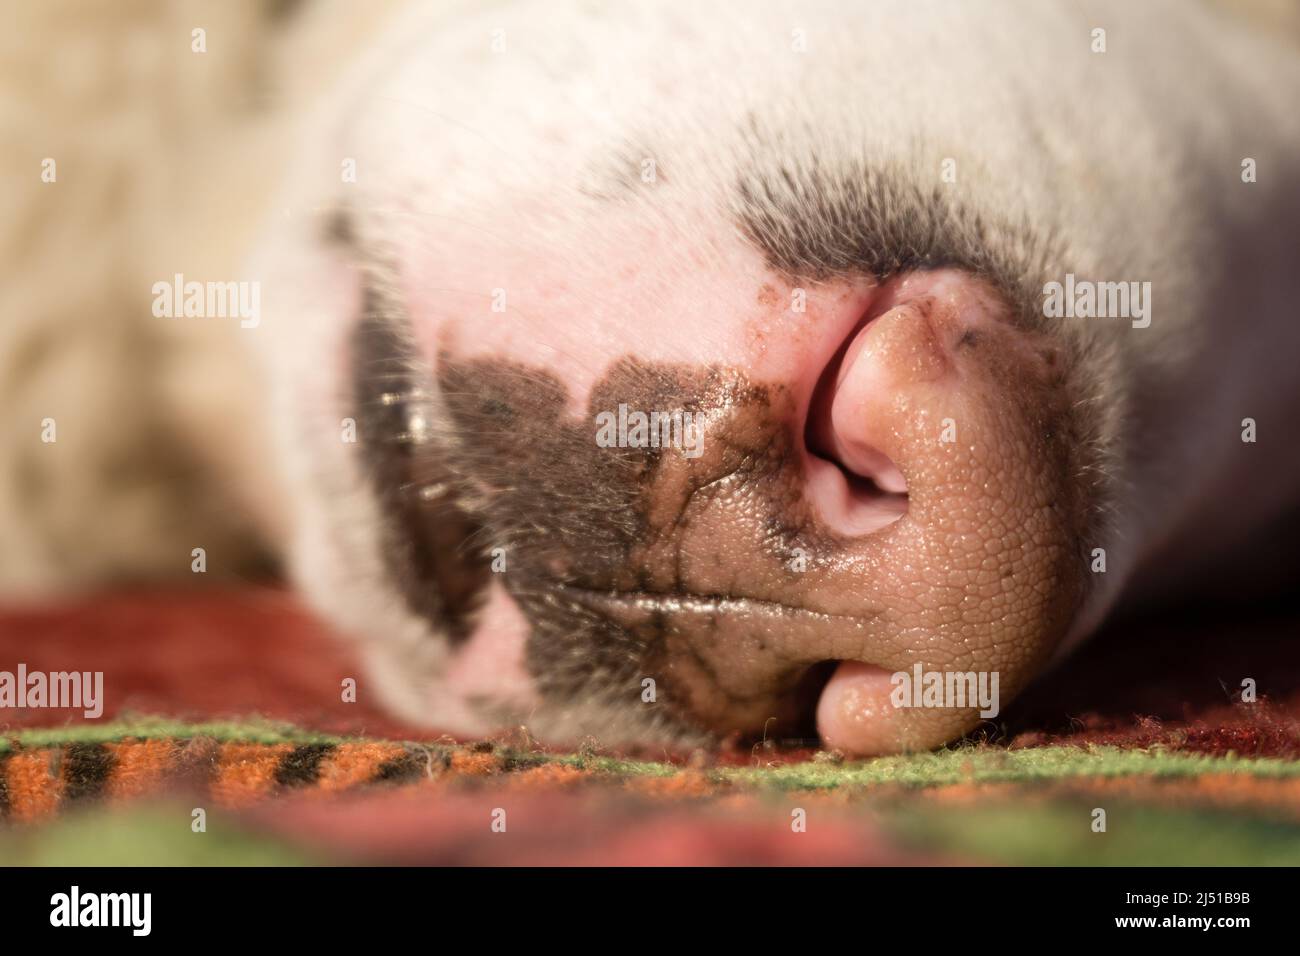 A close up shot of nose of a sleeping white dog with eyes closed. Stock Photo